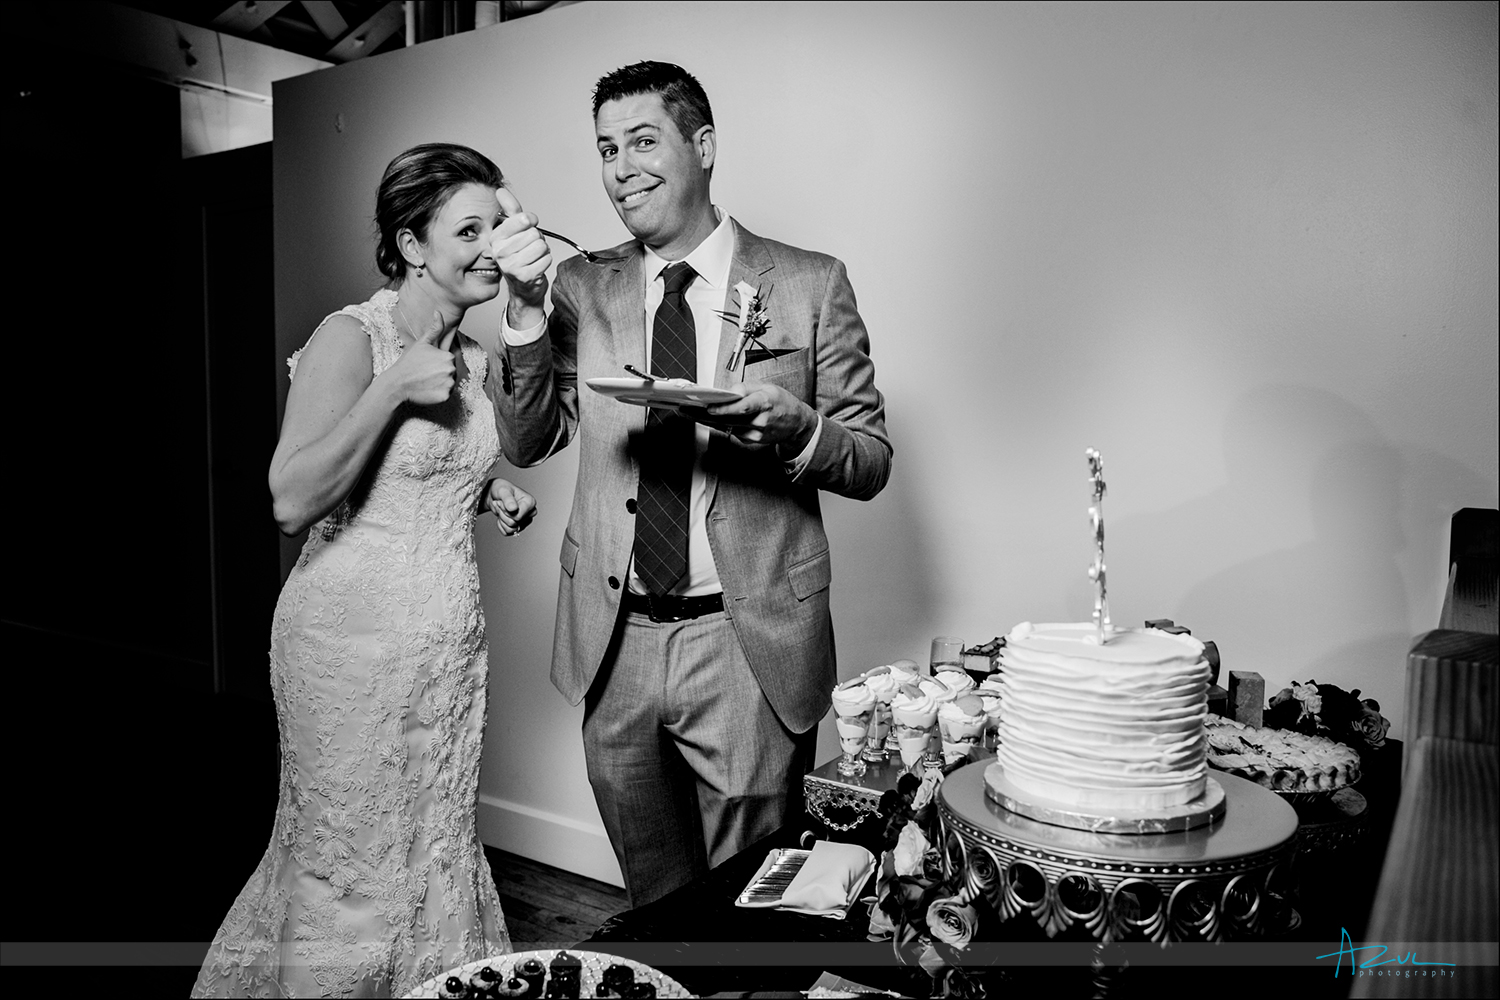 Cute wedding day cake cutting photograph at The Stockroom in Raleigh, North Carolina